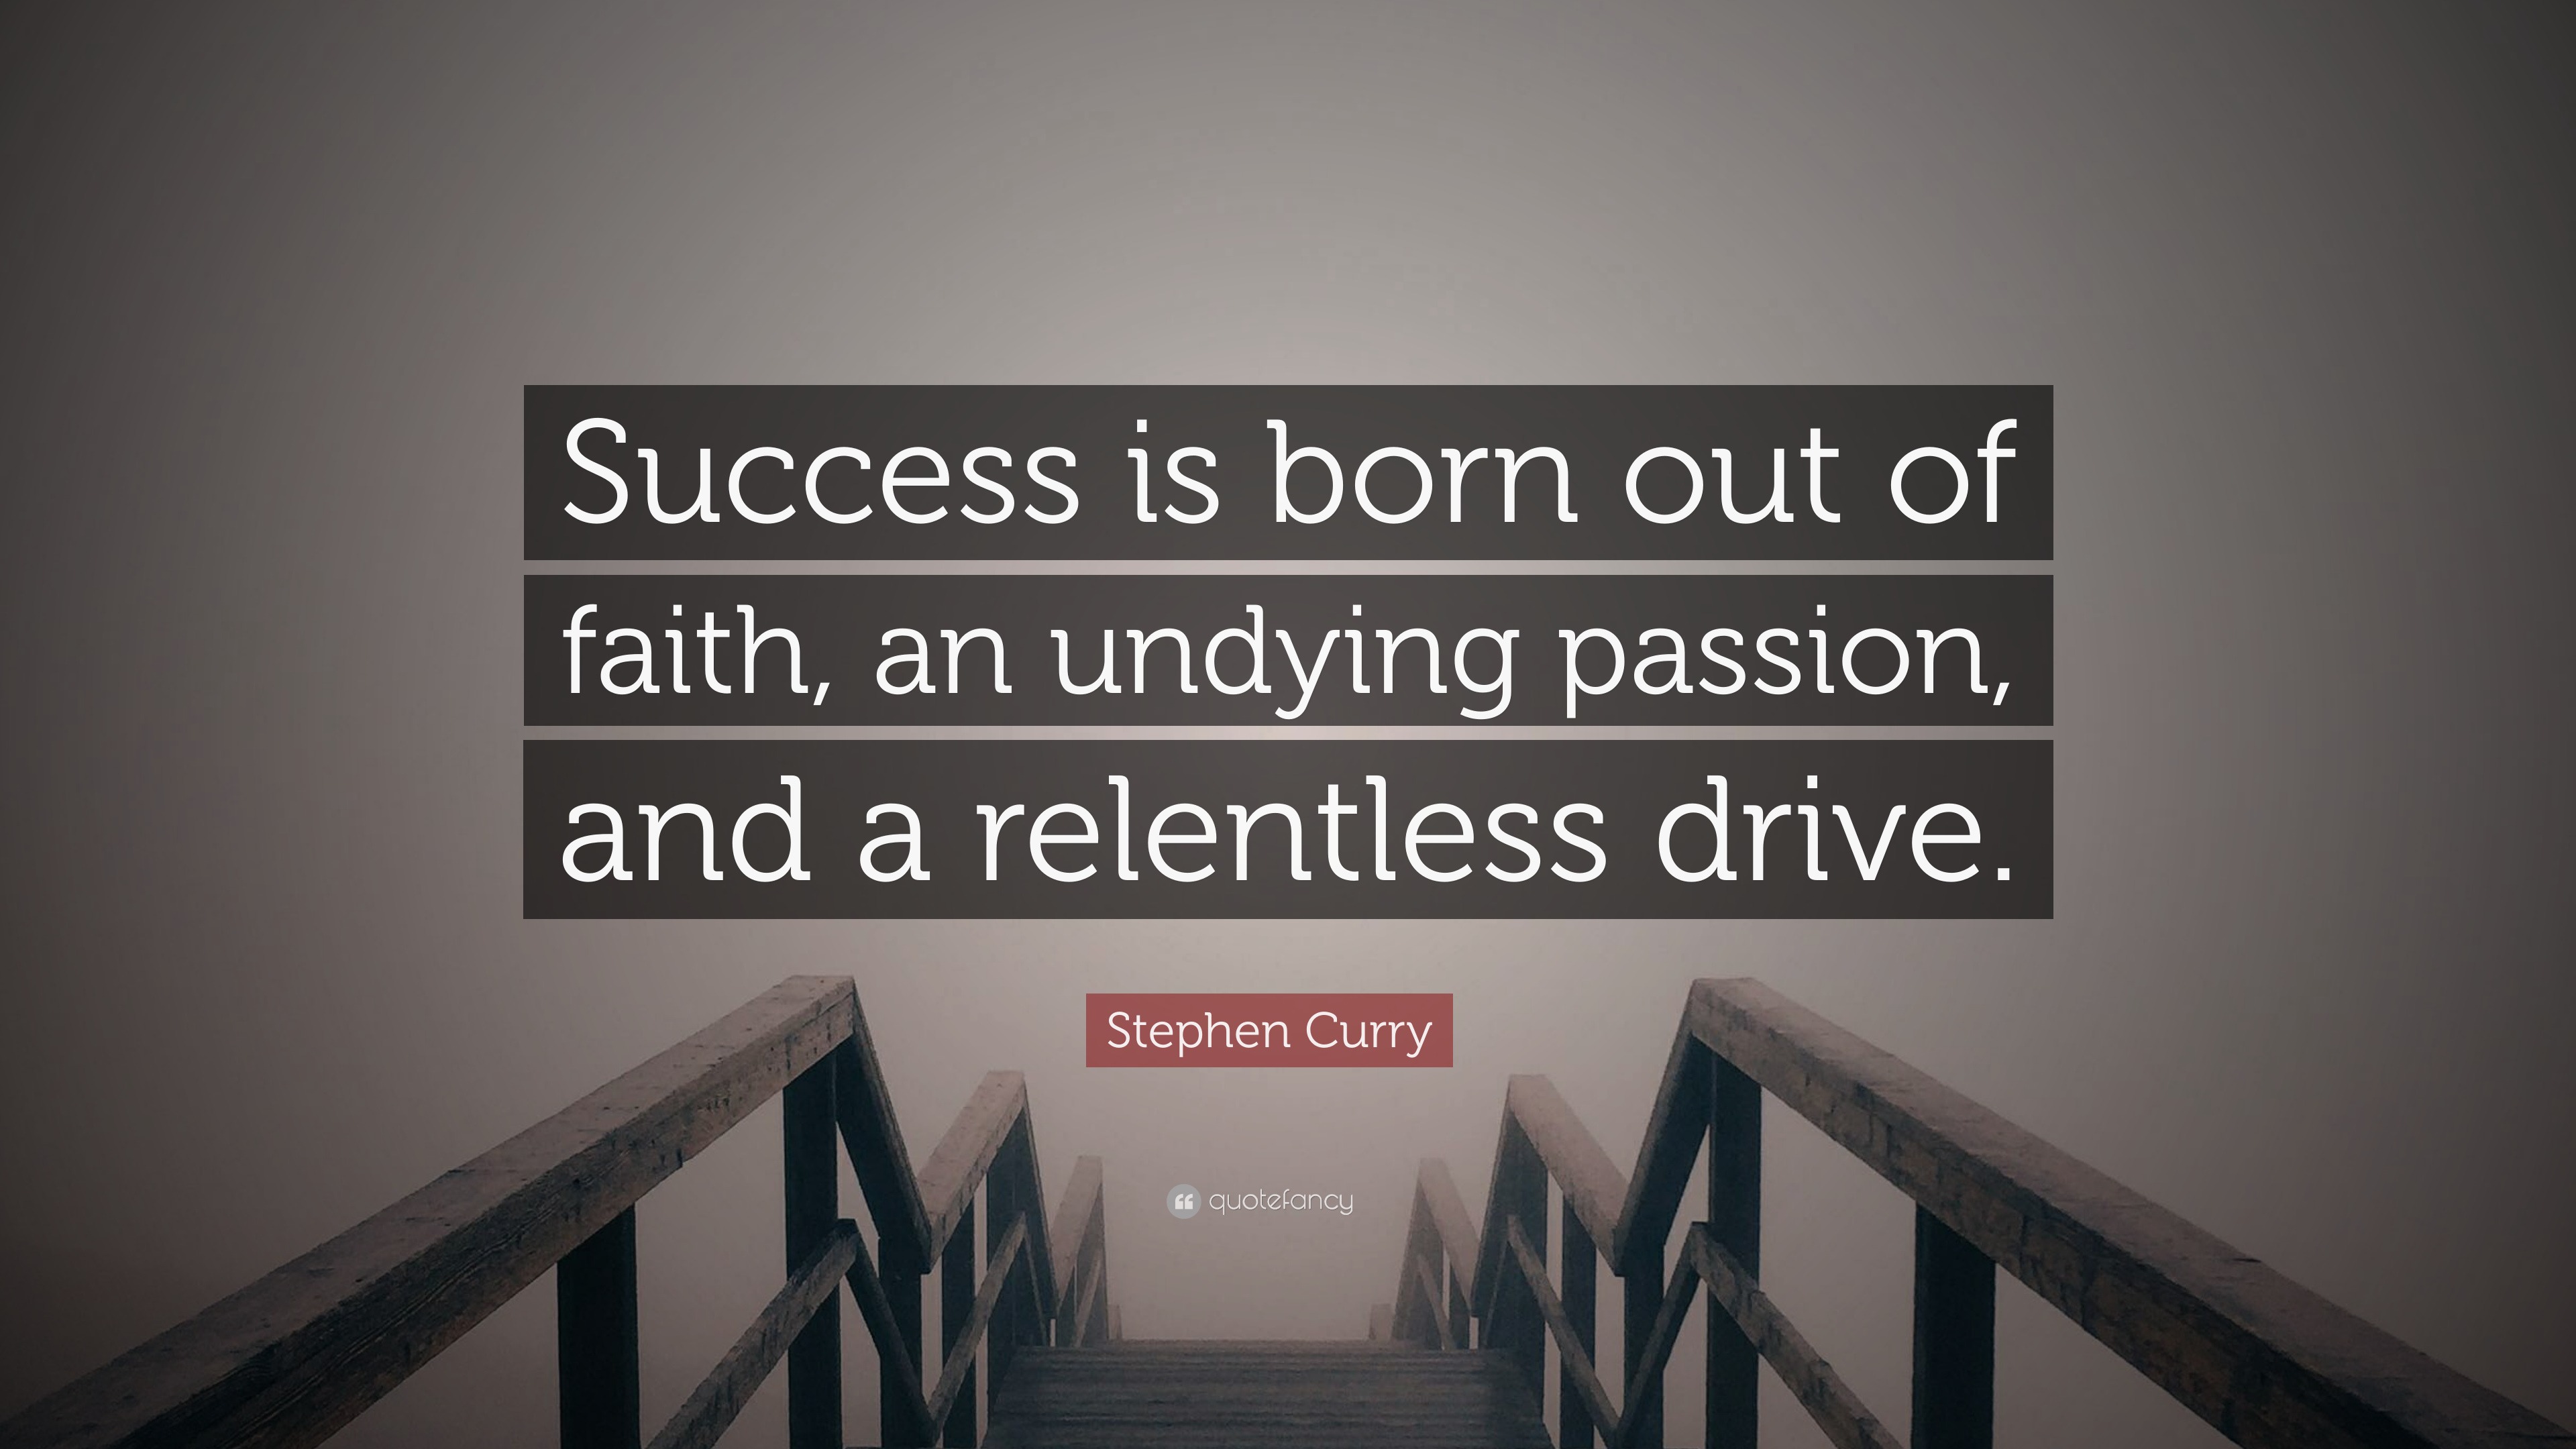 Stephen Curry Quote: “Success is born out of faith